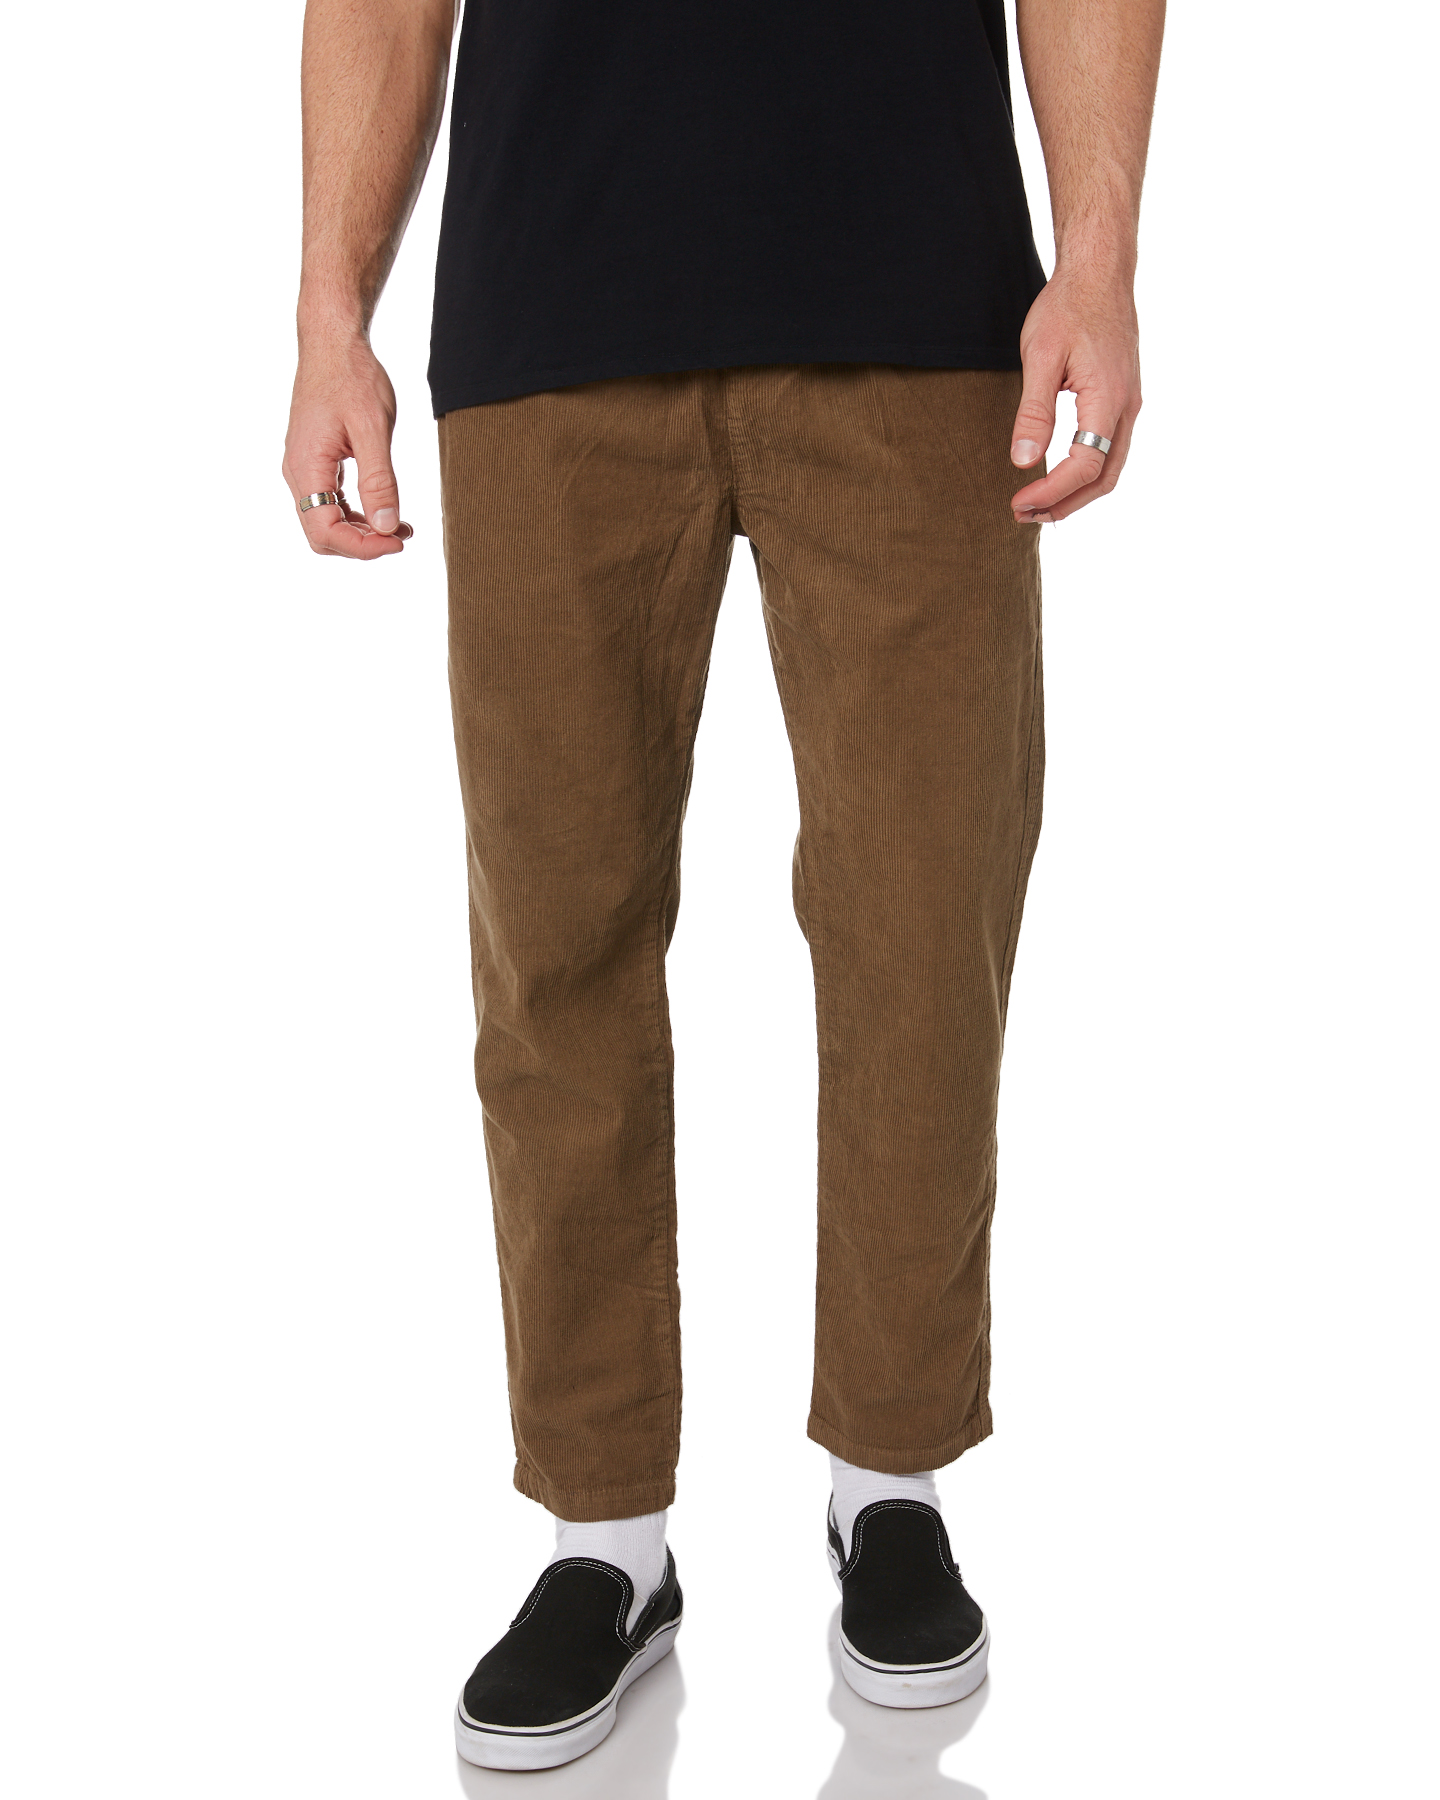 Swell Cord Mens Beach Pant - Dust | SurfStitch